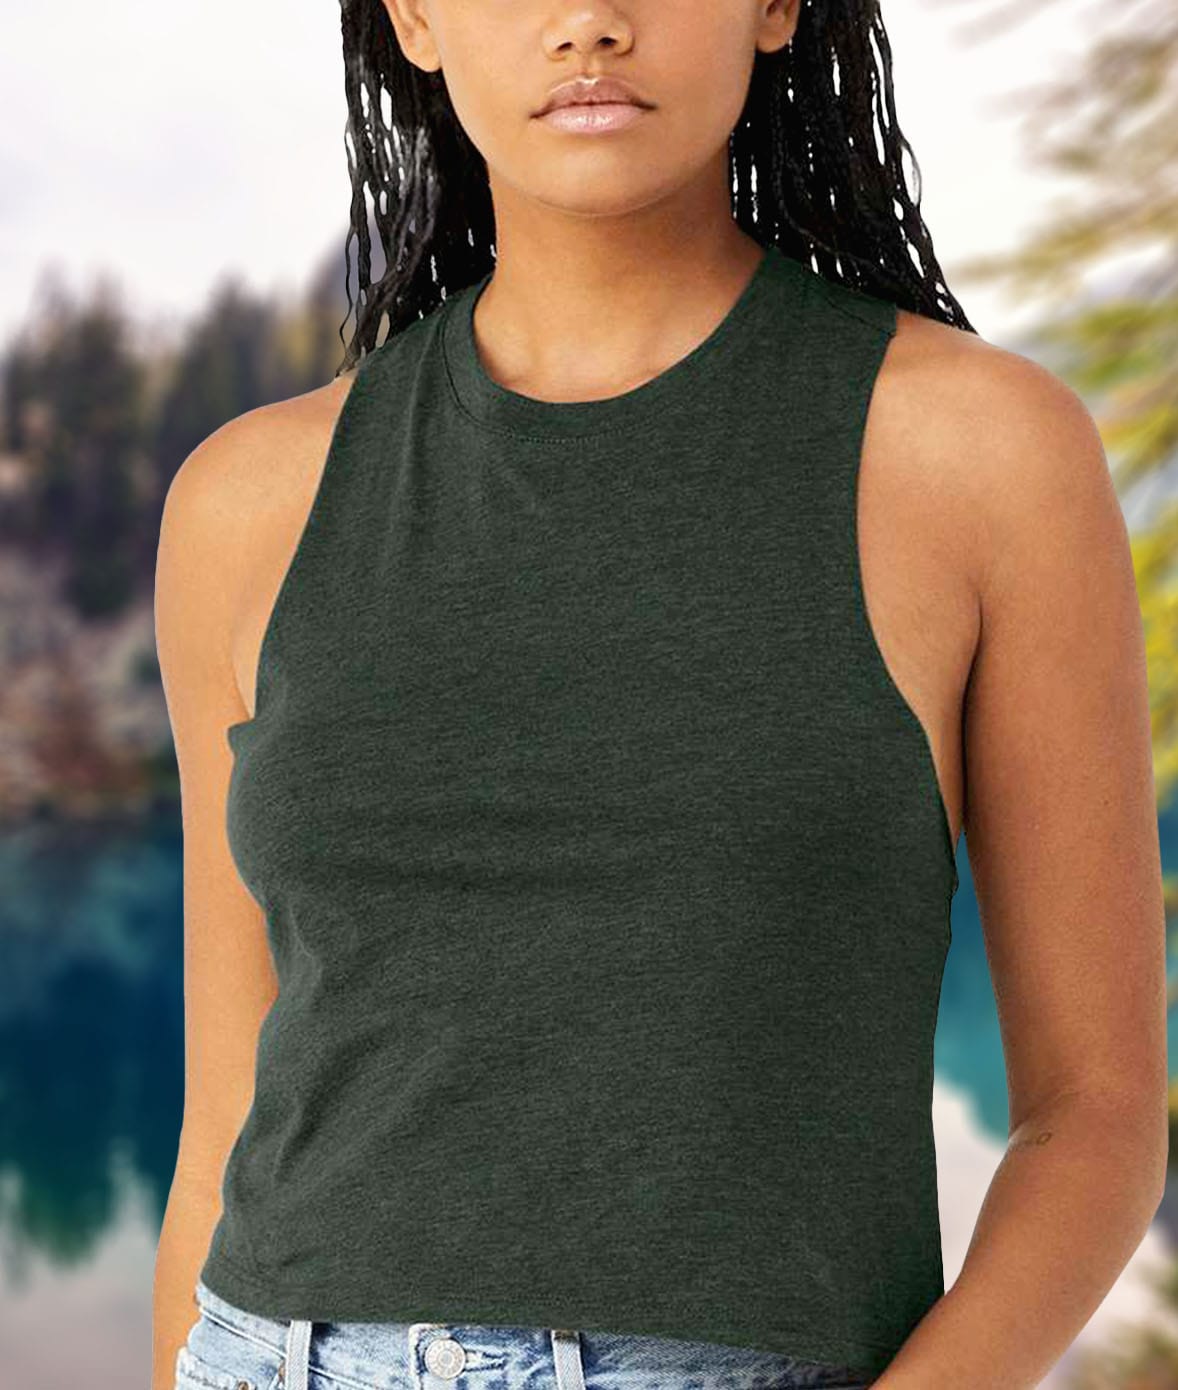 Women's Ridiculously Soft Cropped Racerback Muscle Tank Worn by Model